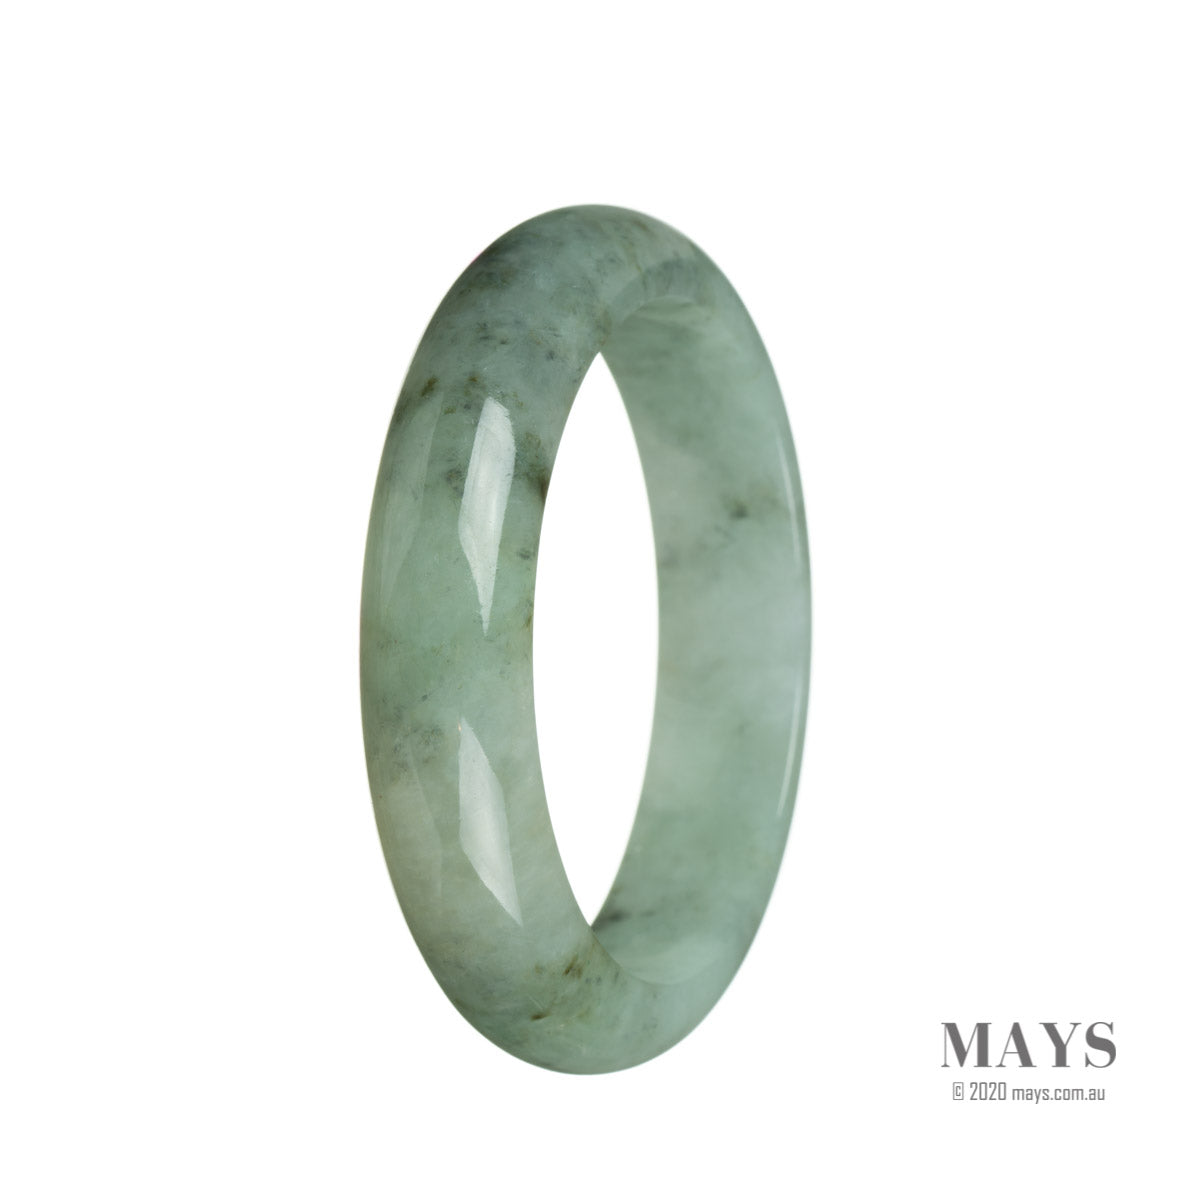 A close-up image of a beautiful green jade bracelet with a half-moon shape, measuring 60mm in diameter. This genuine Grade A traditional jade bracelet is a stunning accessory from MAYS.